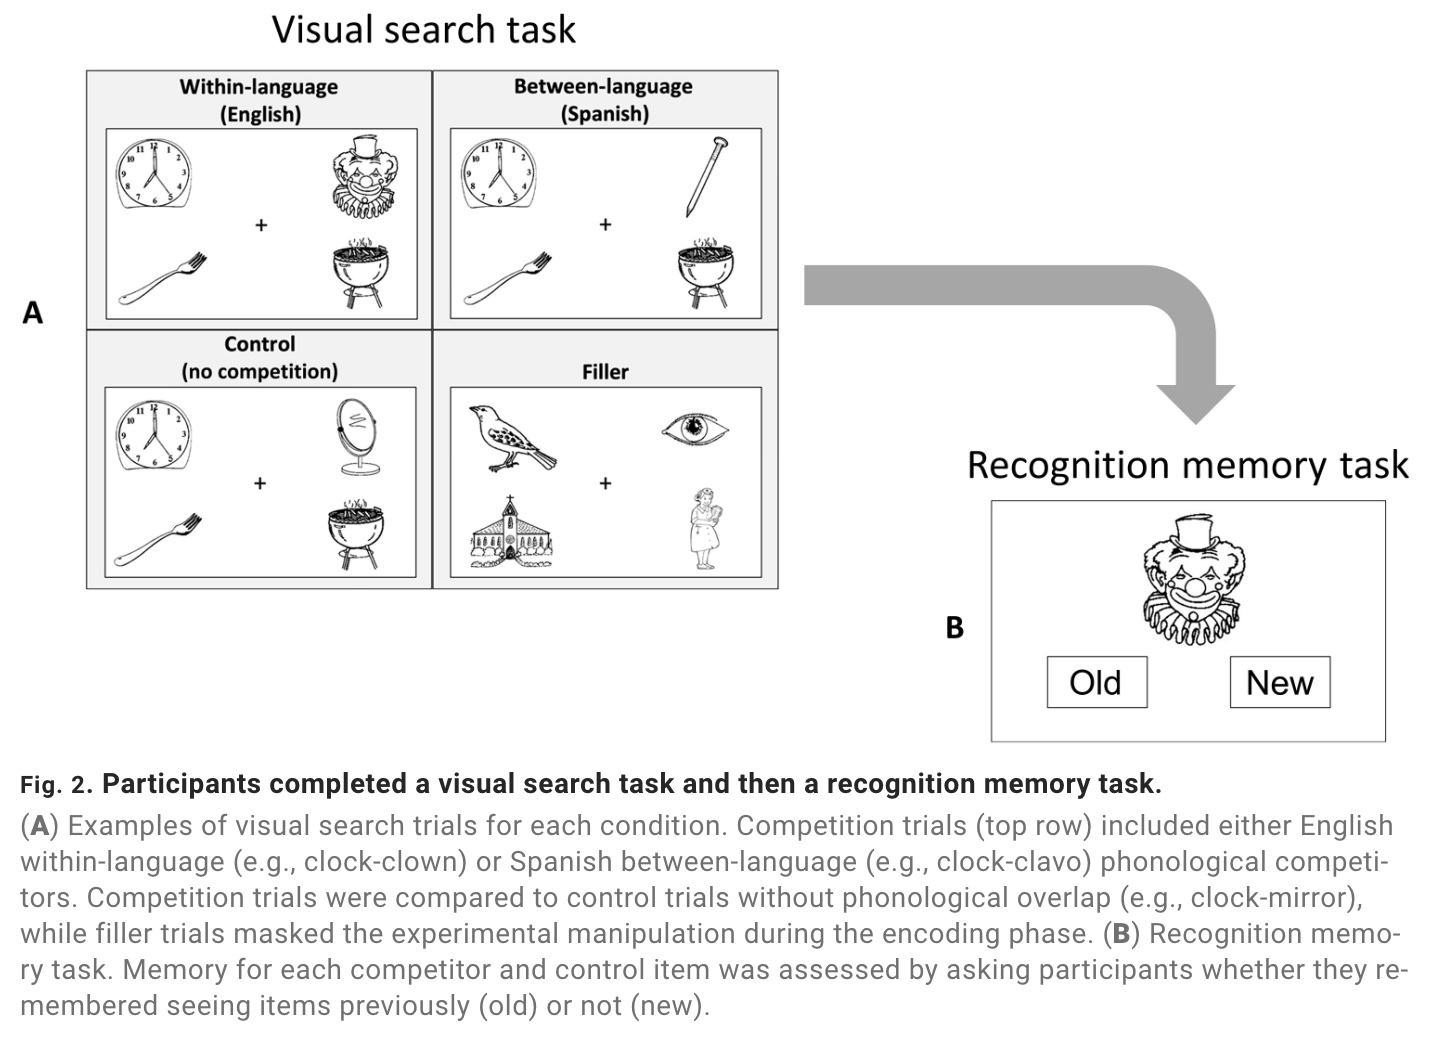 A diagram showing the process of visual search and memory task.